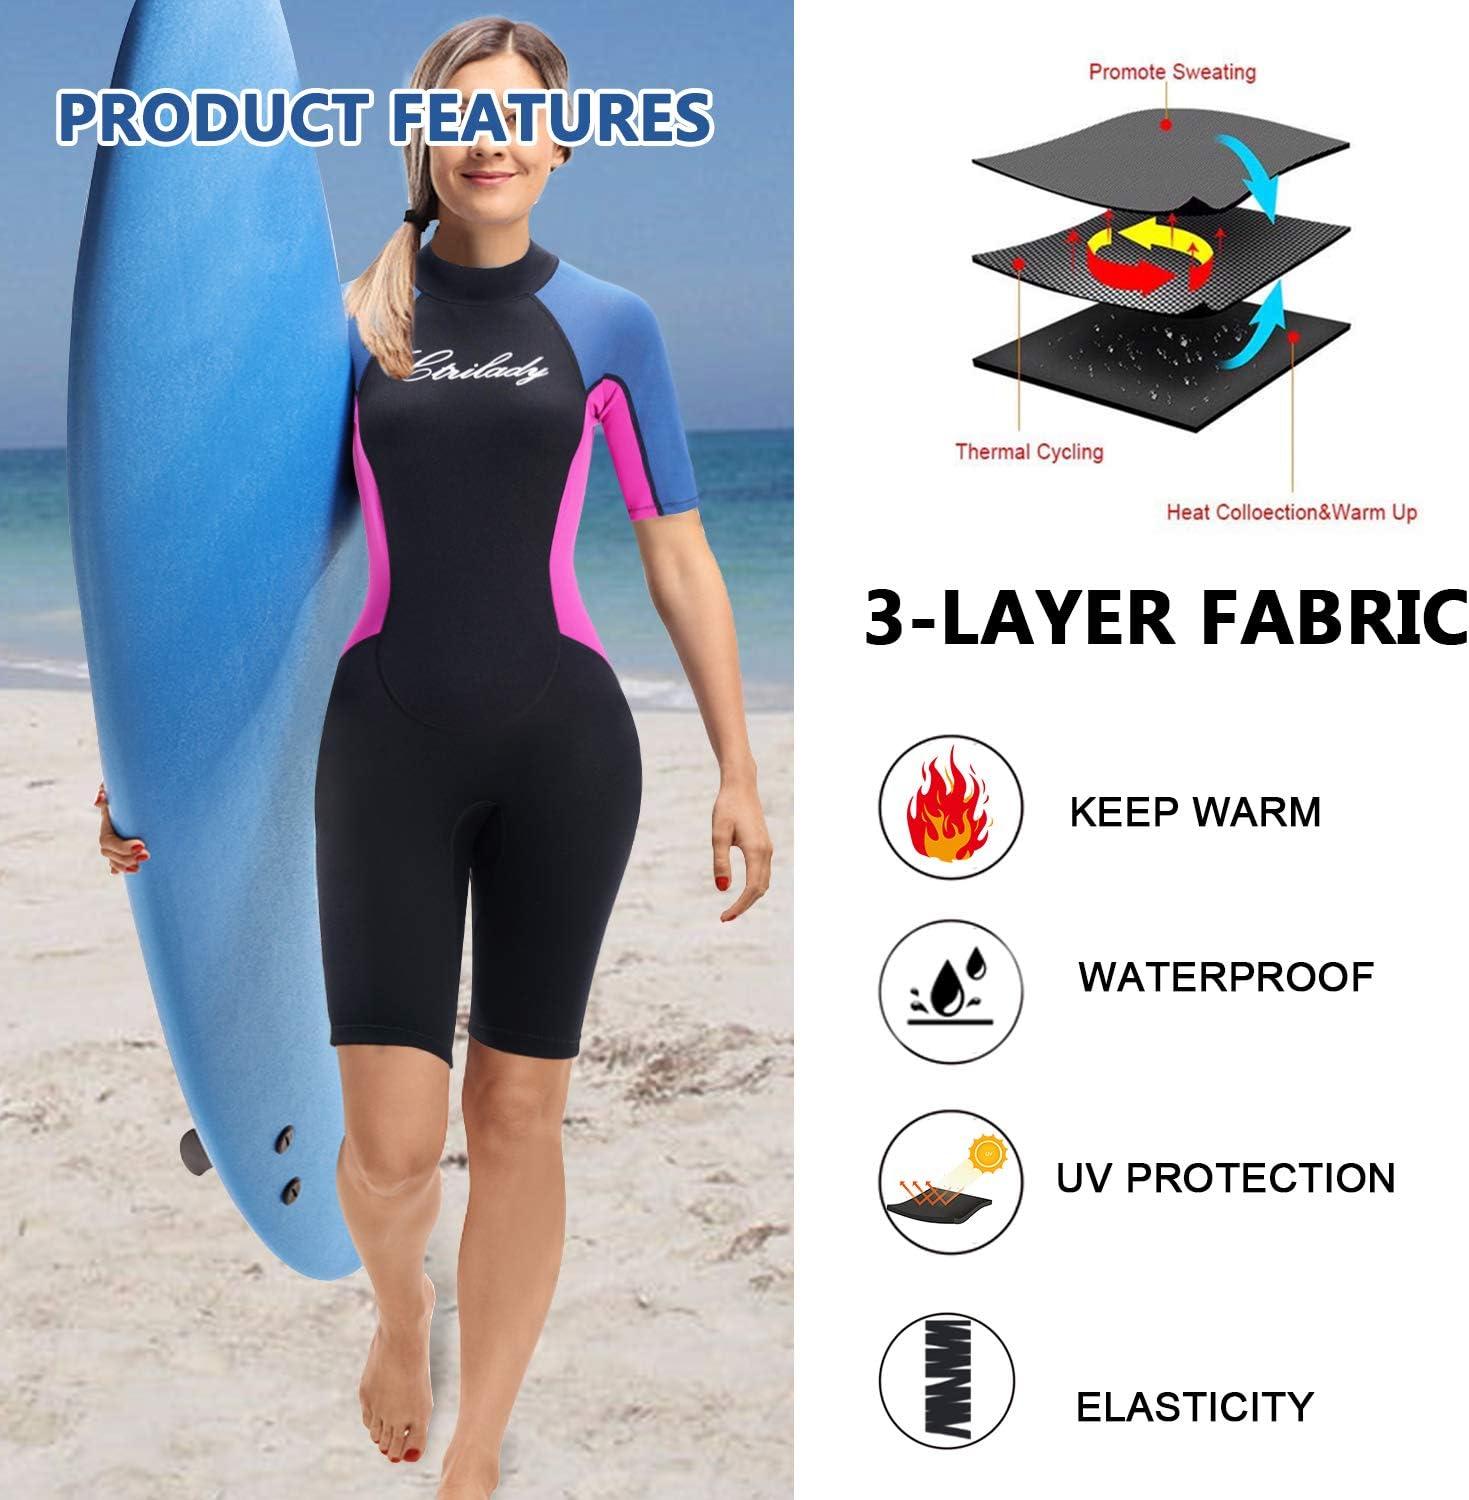 CtriLady Wetsuit Shorty Wetsuit for Women 1.5mm Neoprene Short Sleeve Diving Suits with Back Zipper UV Protection Full Body Swimwear for Swimming Diving Surfing Kayaking Snorkeling Black Medium image image